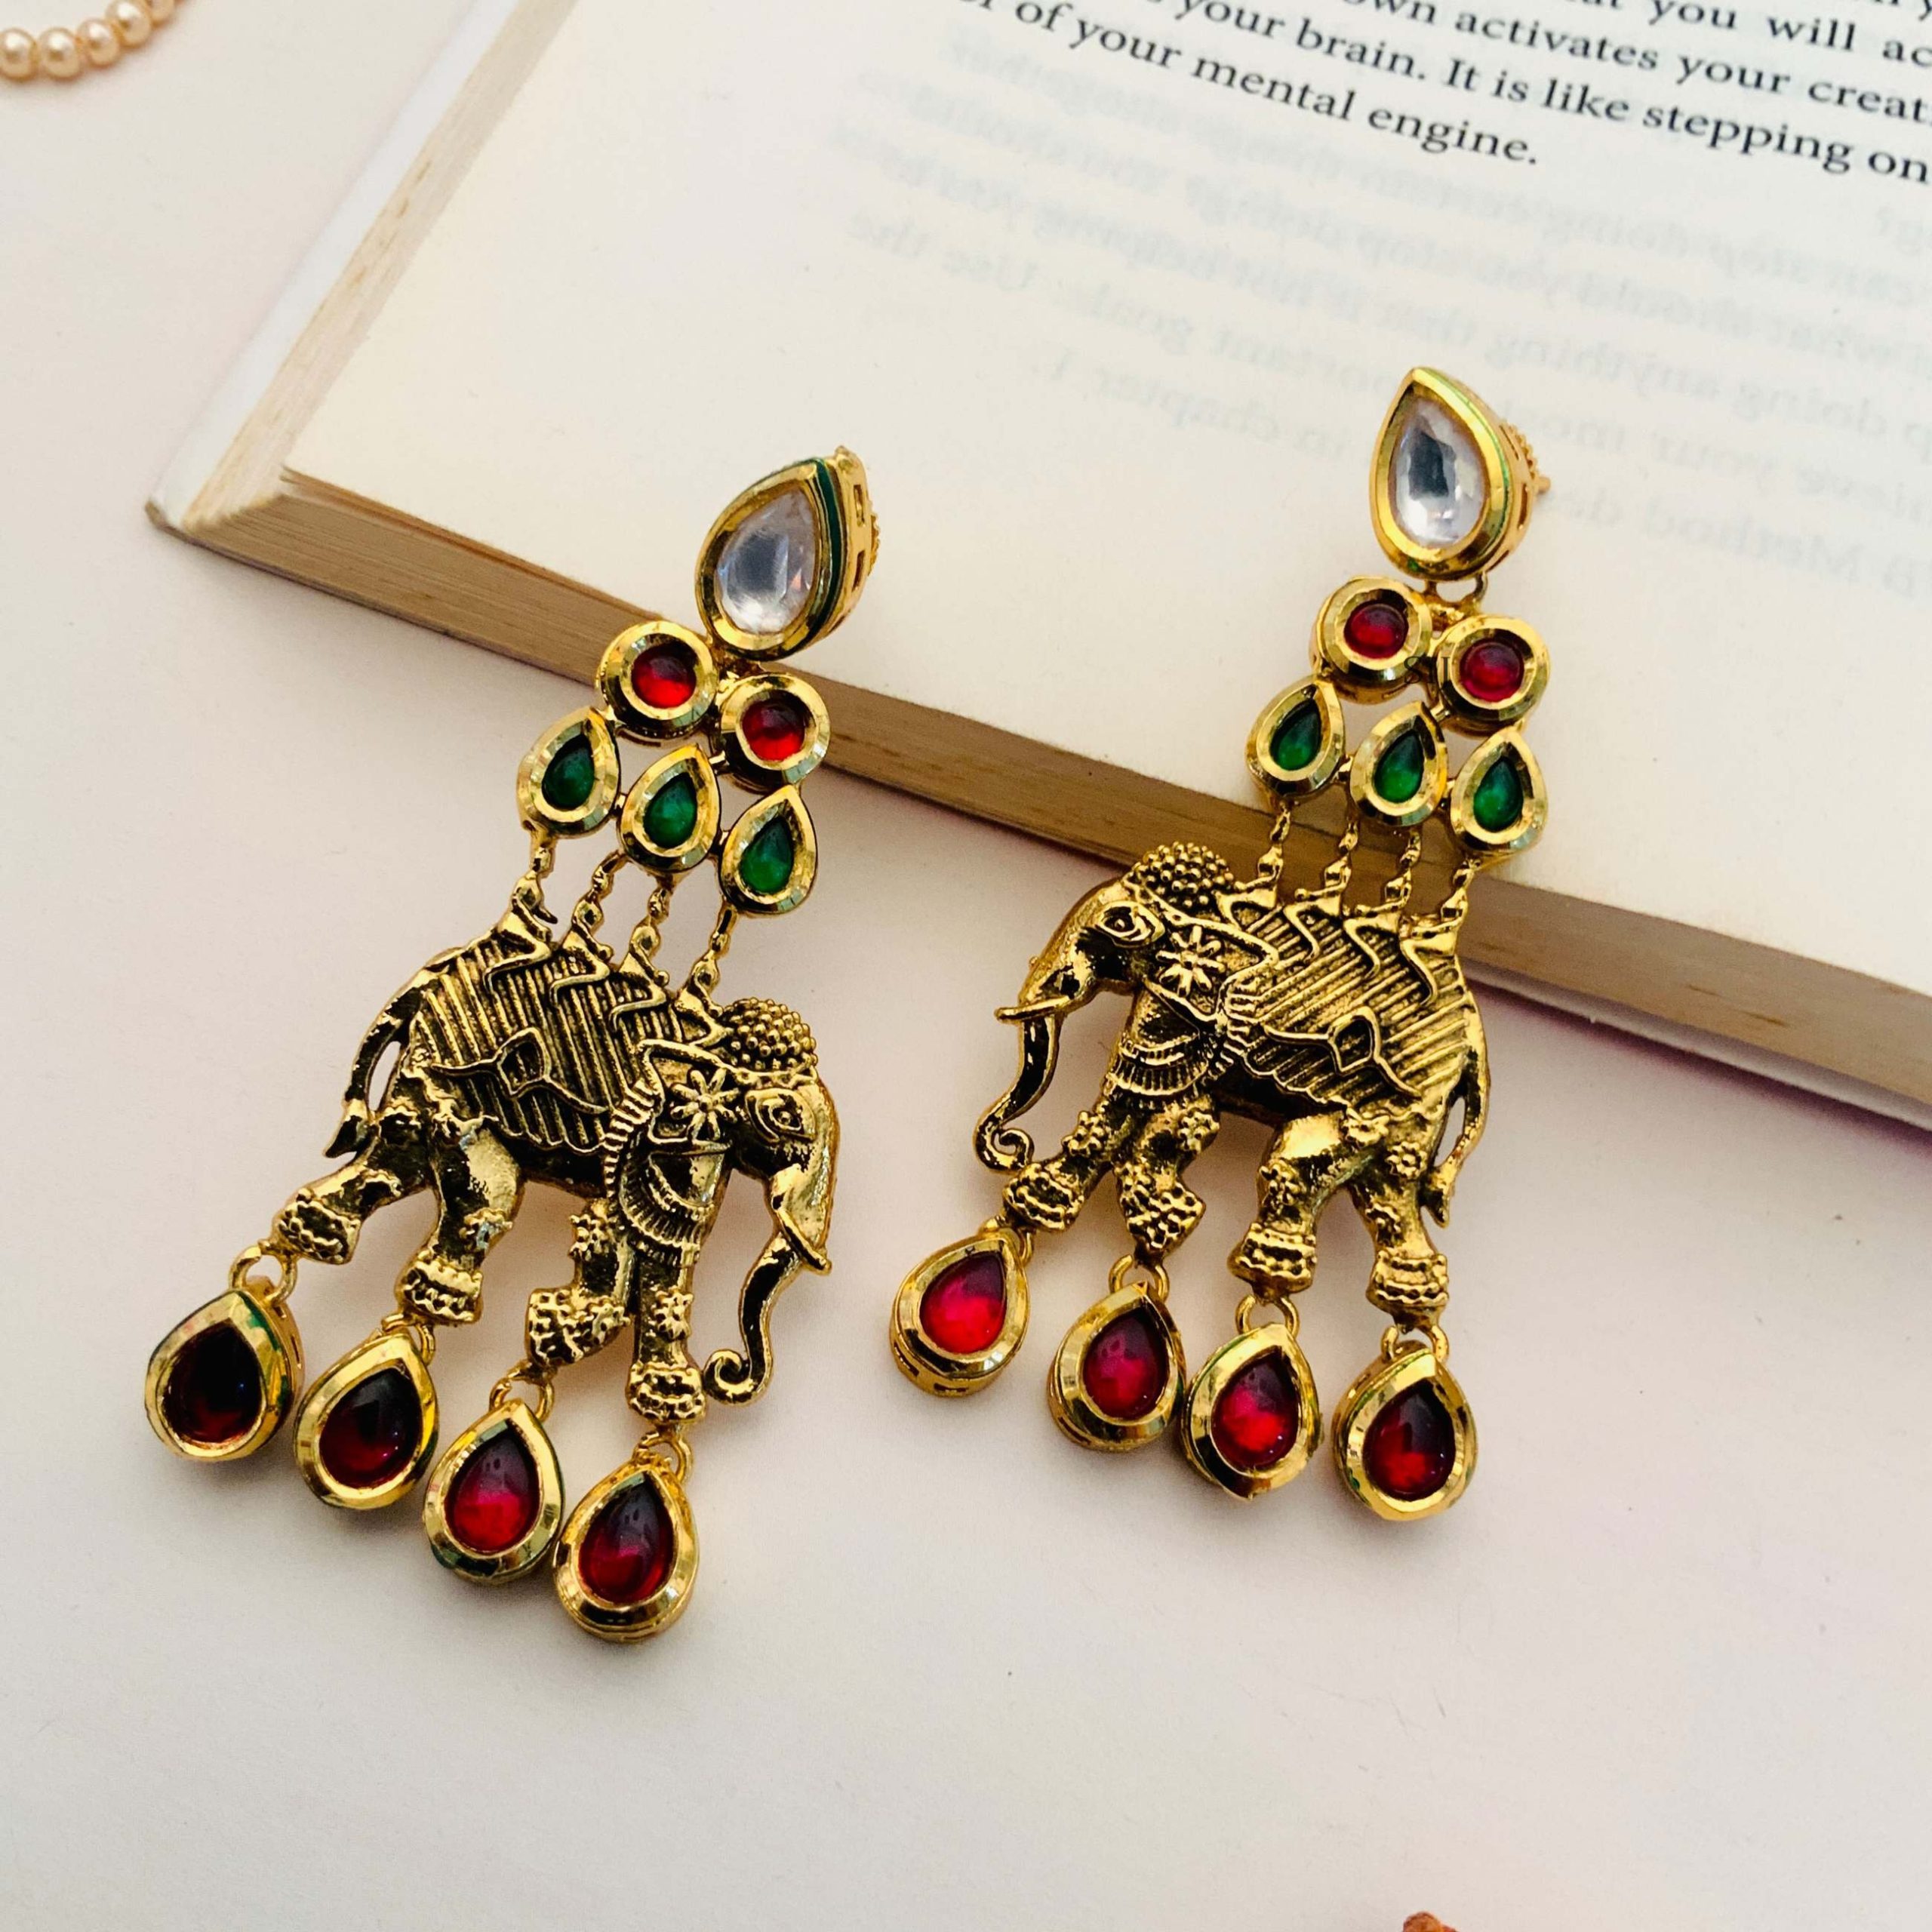 Antique Temple Earrings with Elephant Hangings